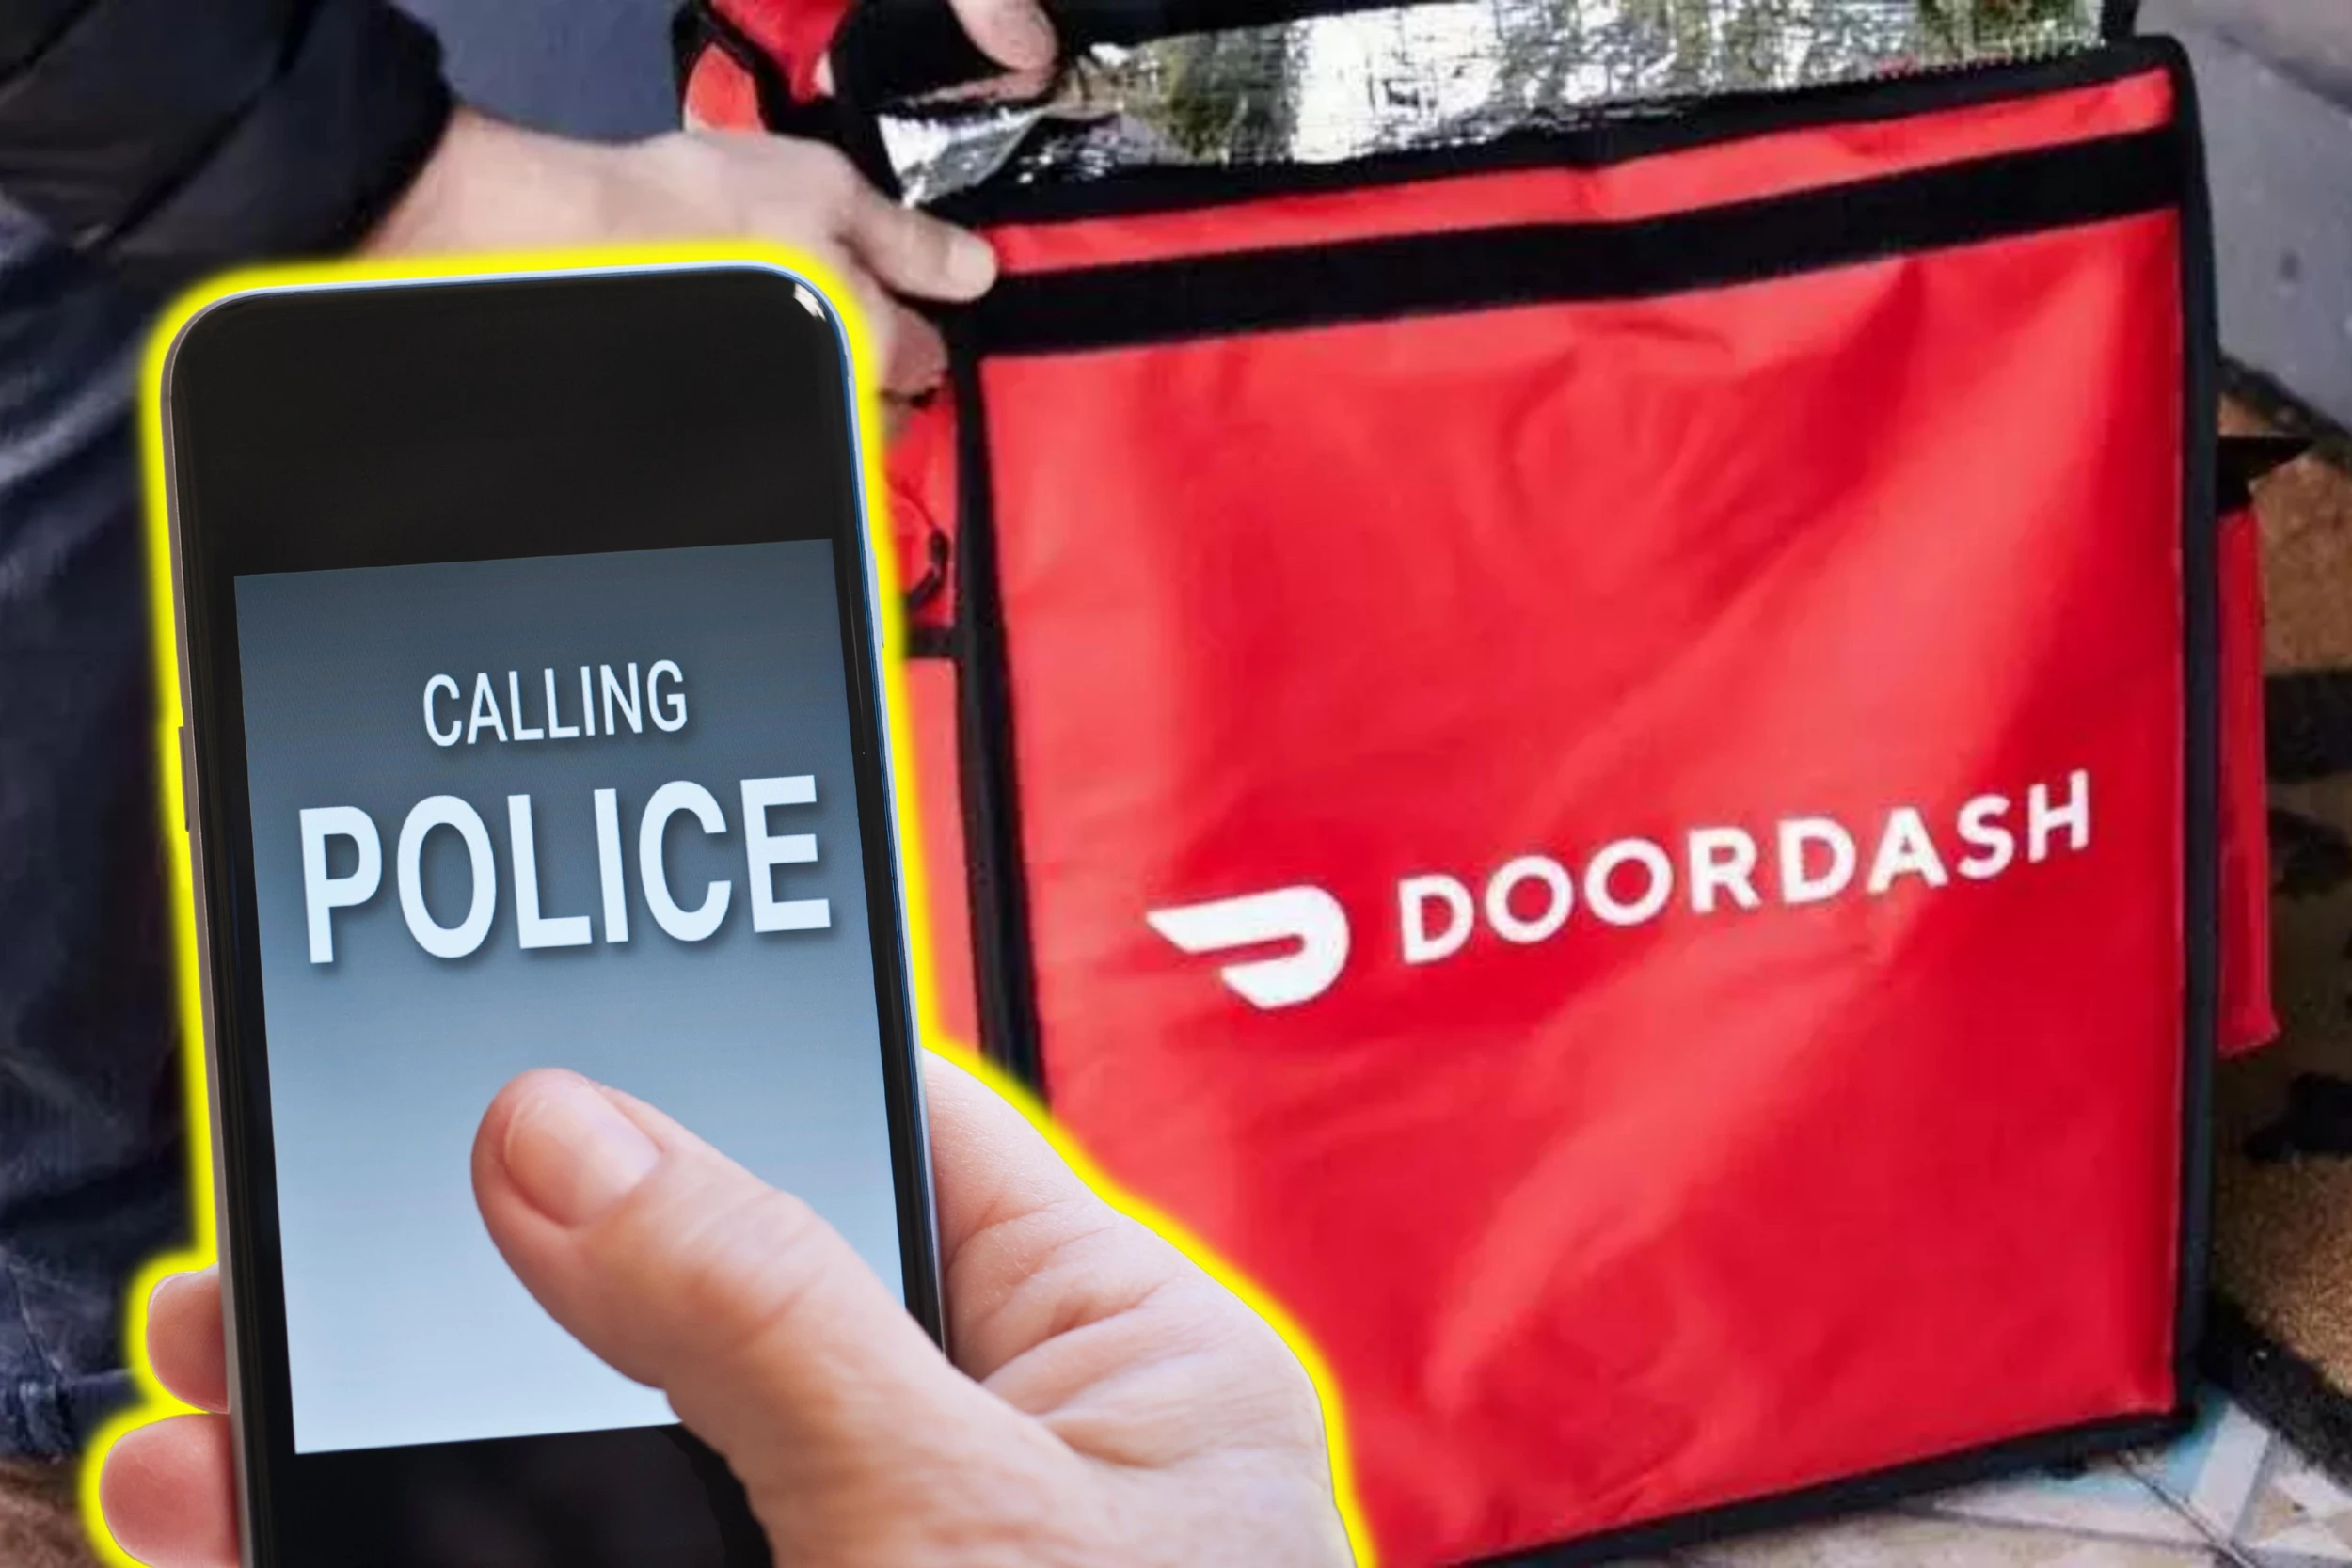 Injured while Making a DoorDash Delivery – Is the Customer Responsible? -  Downtown LA Law Group